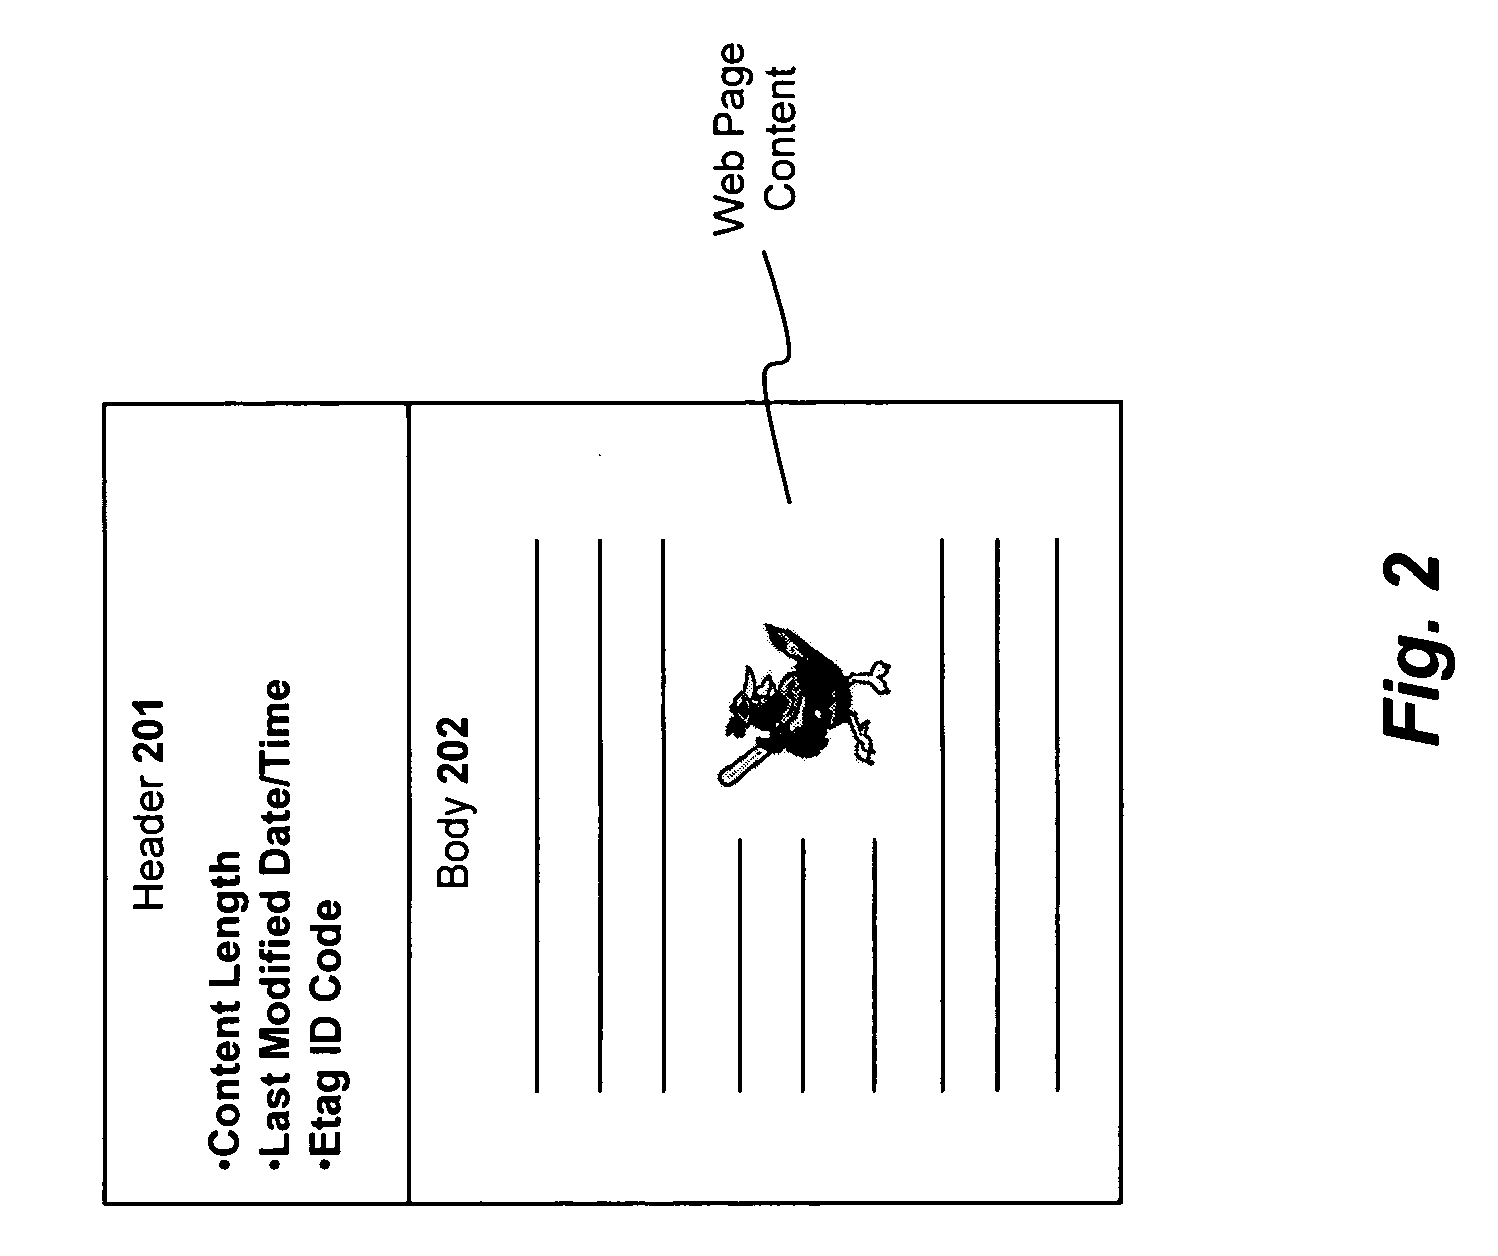 System and method for optimizing content retrieval over a data network